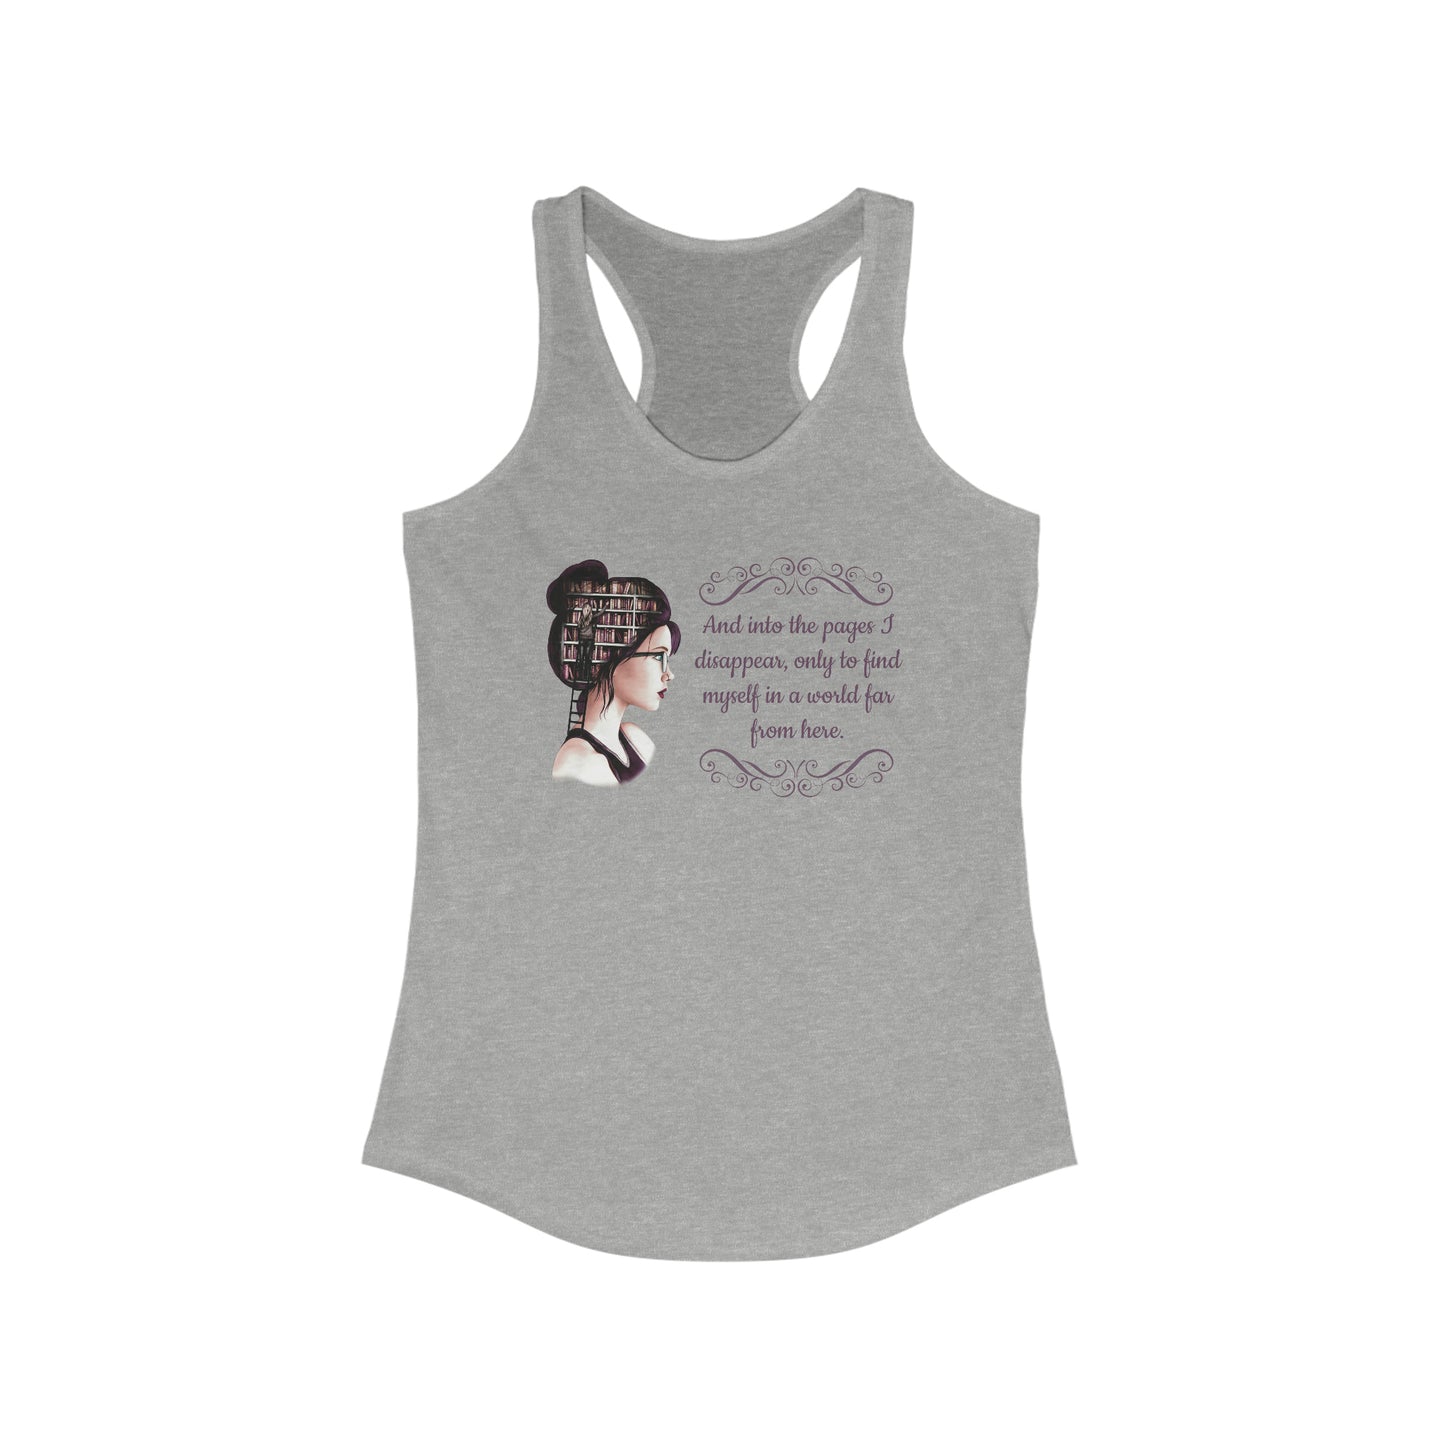 Disappear Into The Pages Women's Ideal Racerback Tank